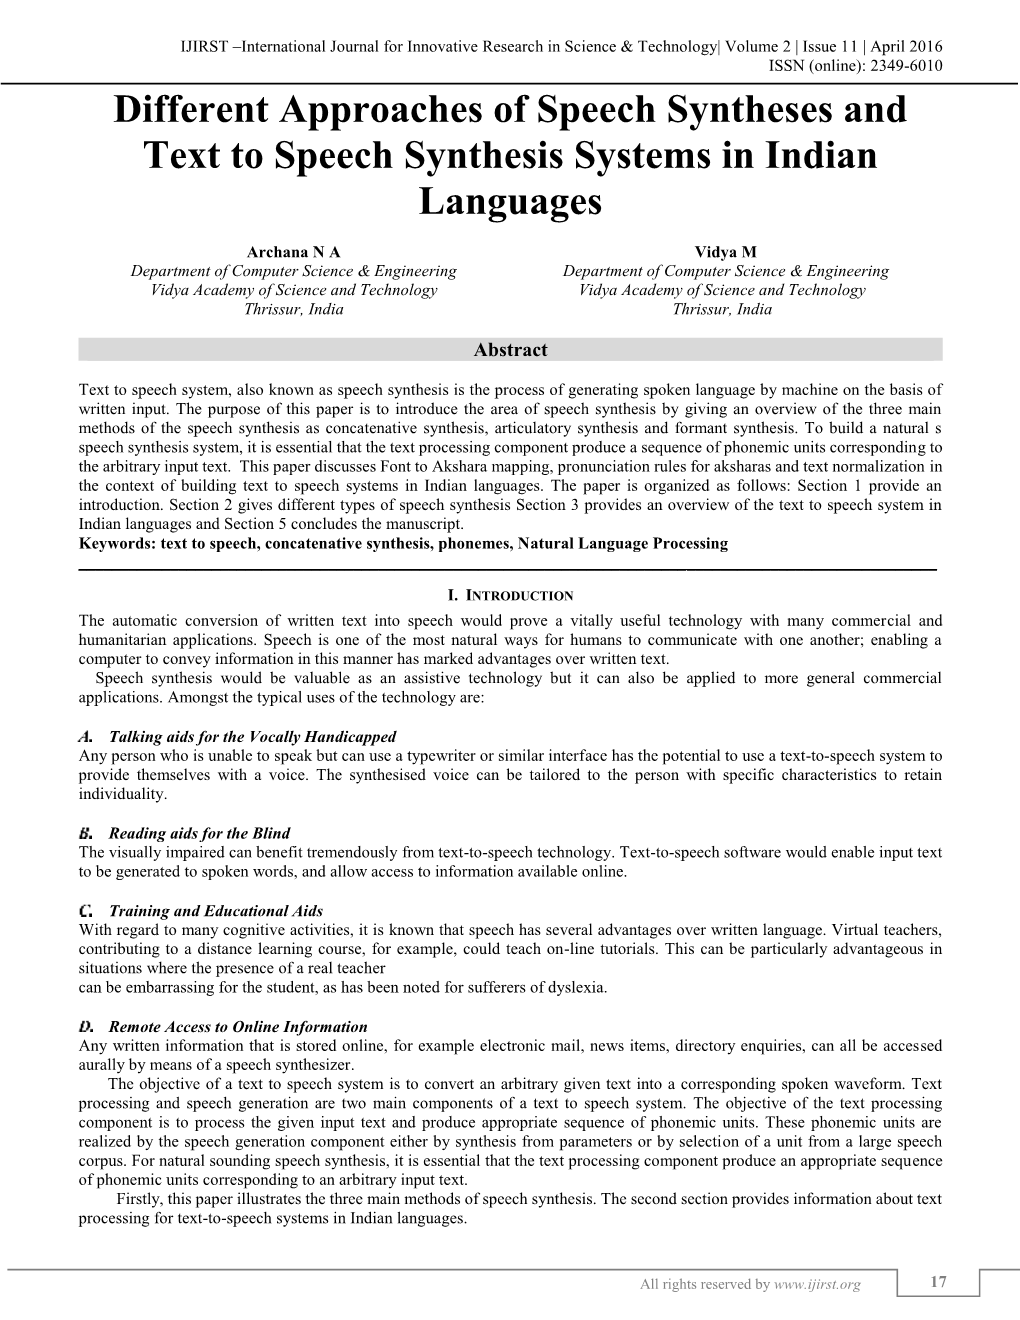 Different Approaches of Speech Syntheses and Text to Speech Synthesis Systems in Indian